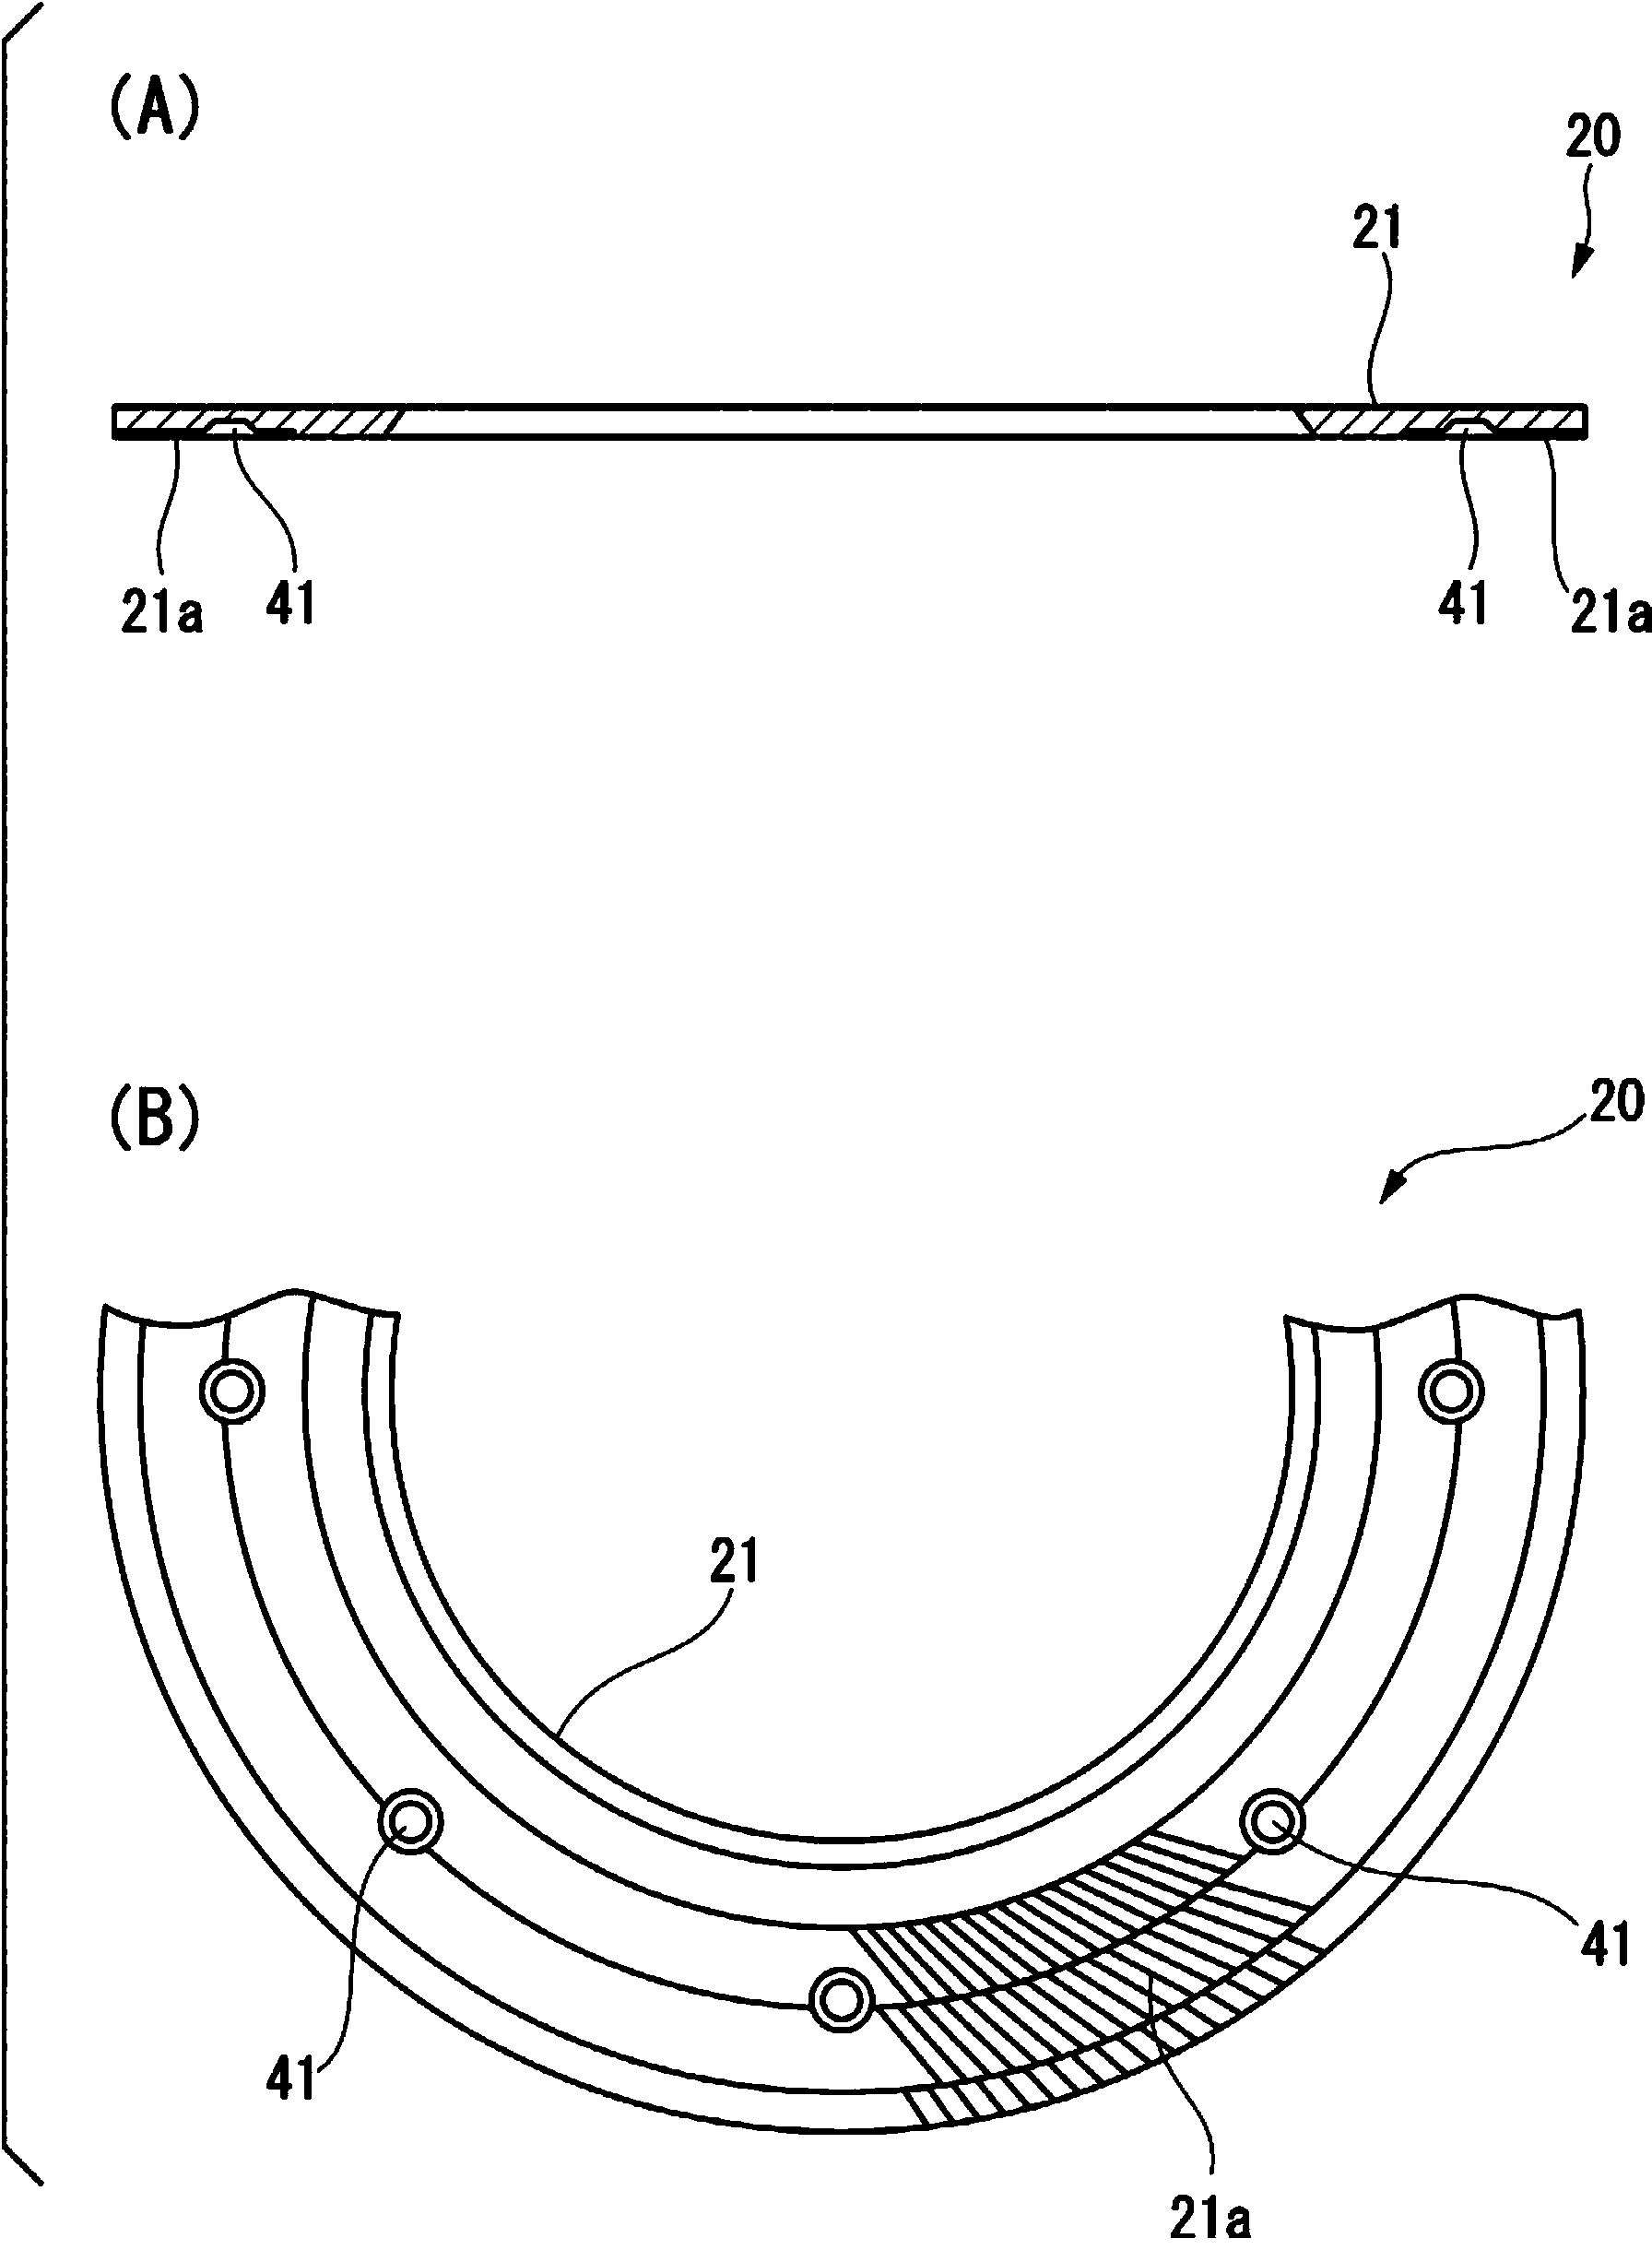 Continuous kneading device